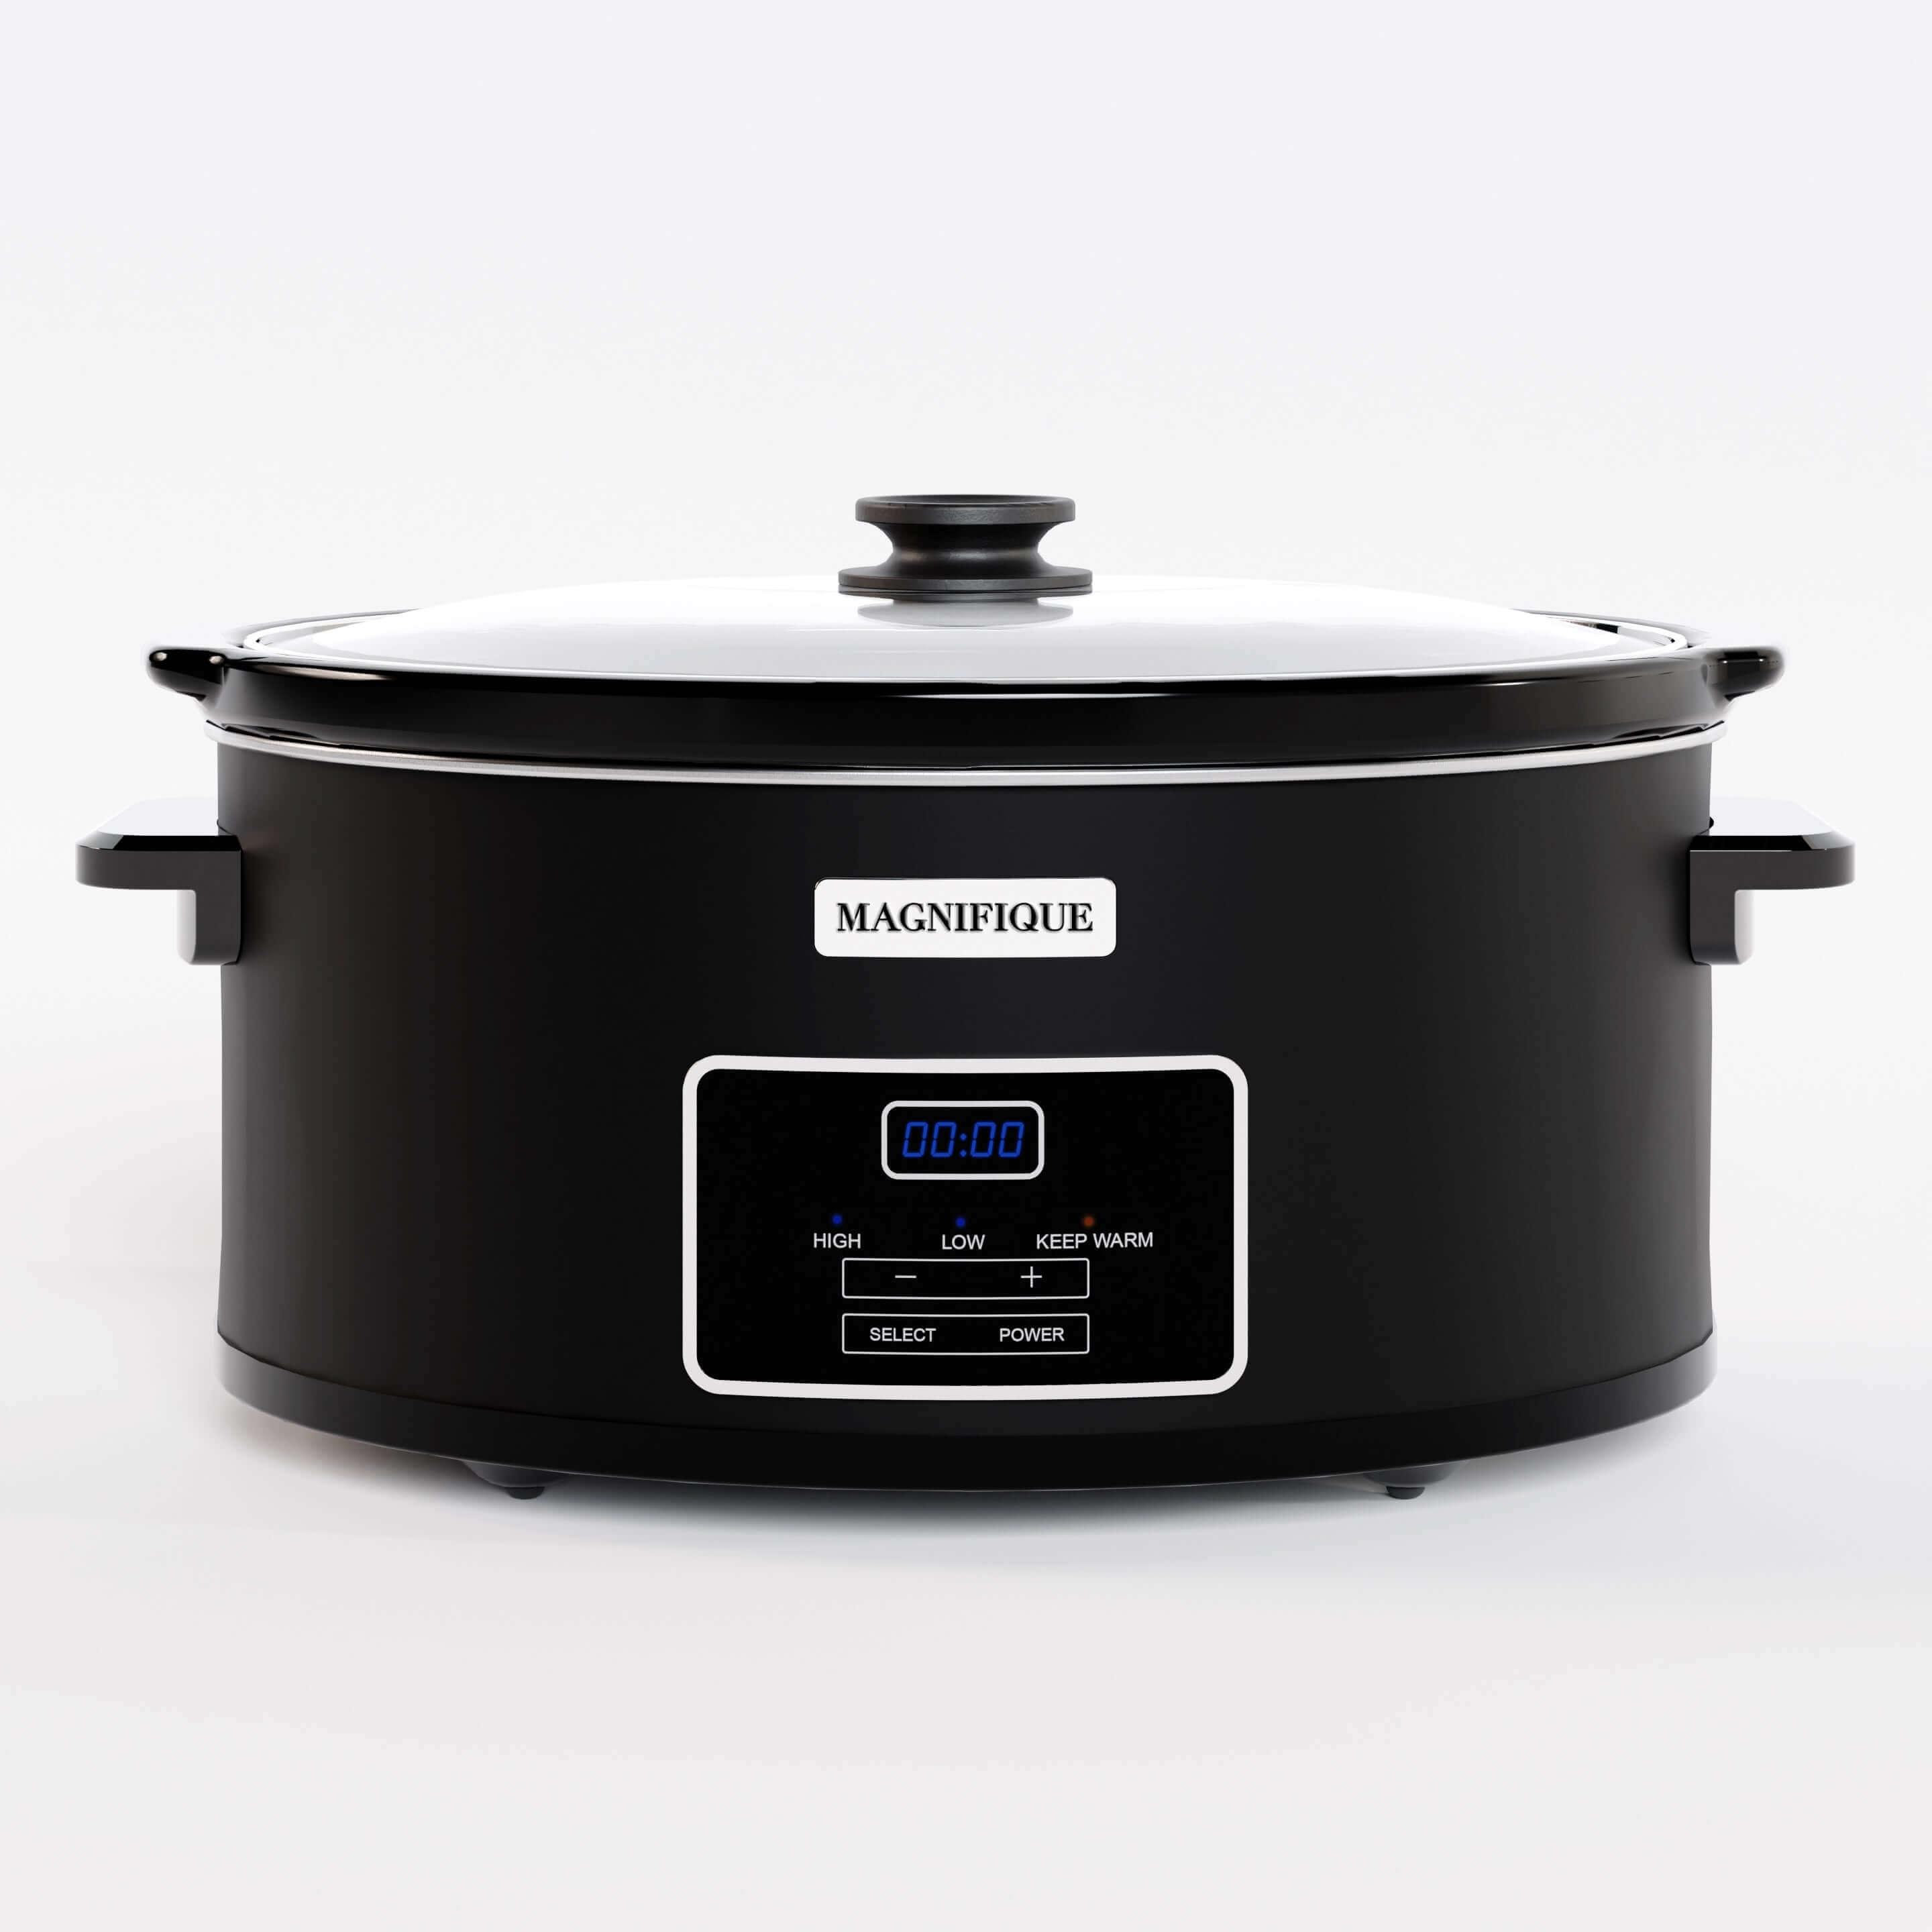 This massive 8-quart Crock-Pot Oval Slow Cooker in black is only